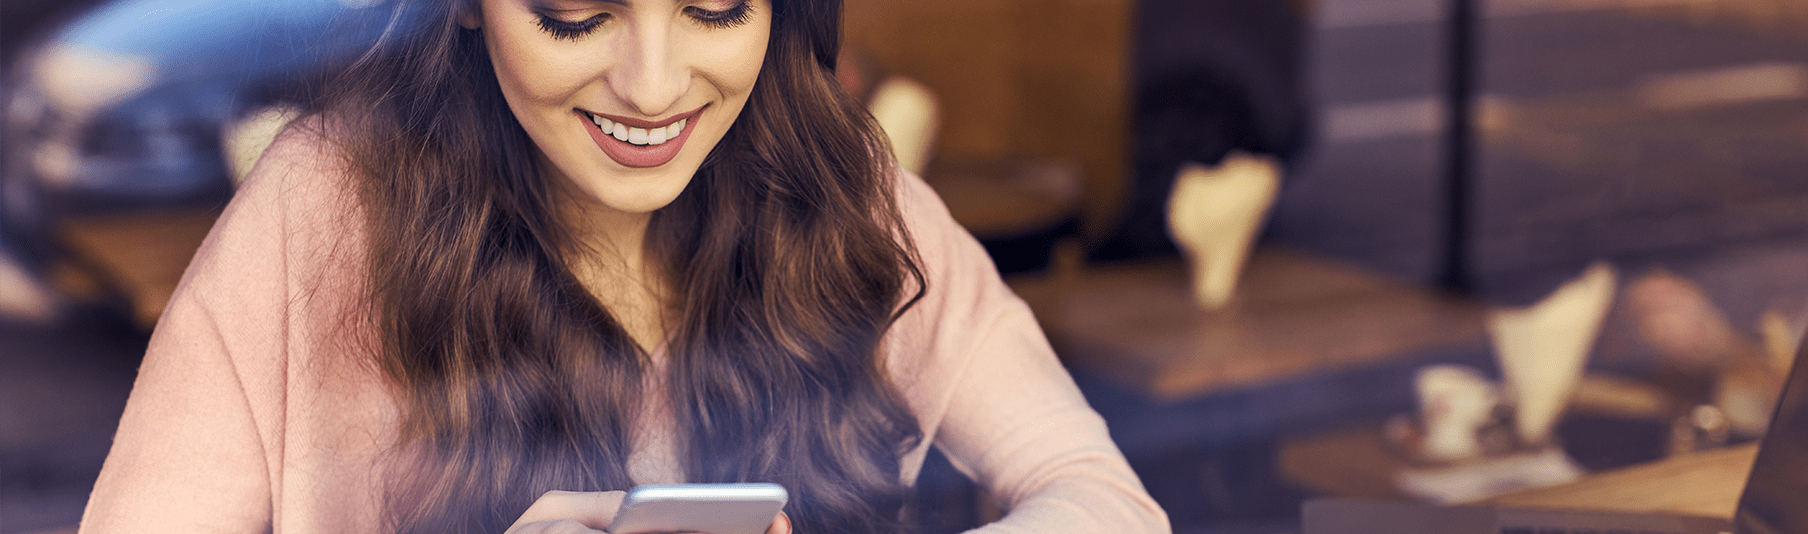 Personal Insurance: A young woman smiling as she looks at something on her phone